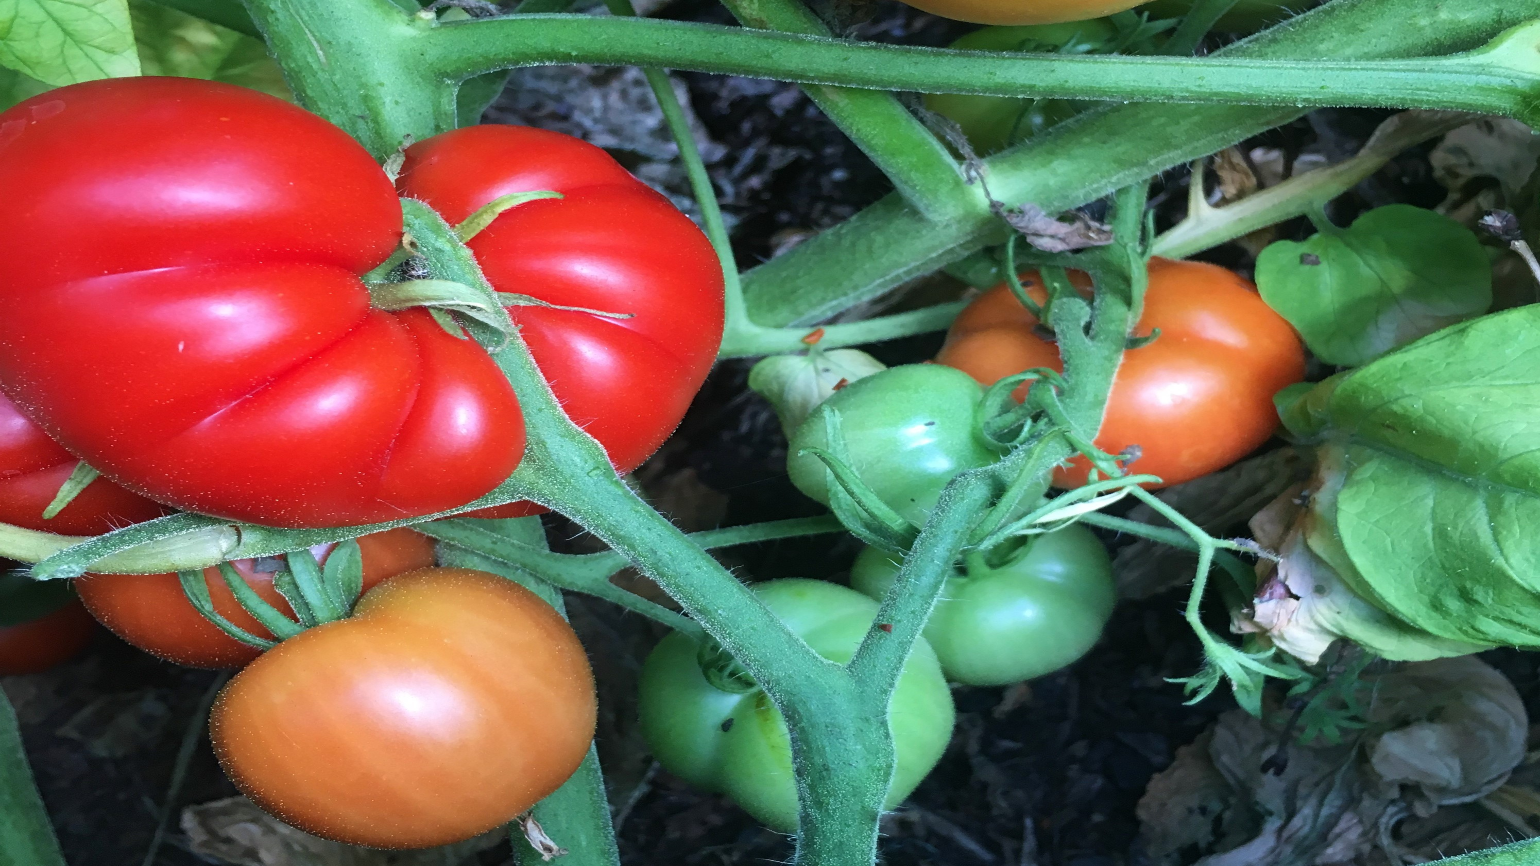 A large lumpy red tomato growing on a green vine with some smaller orange and green tomatoes